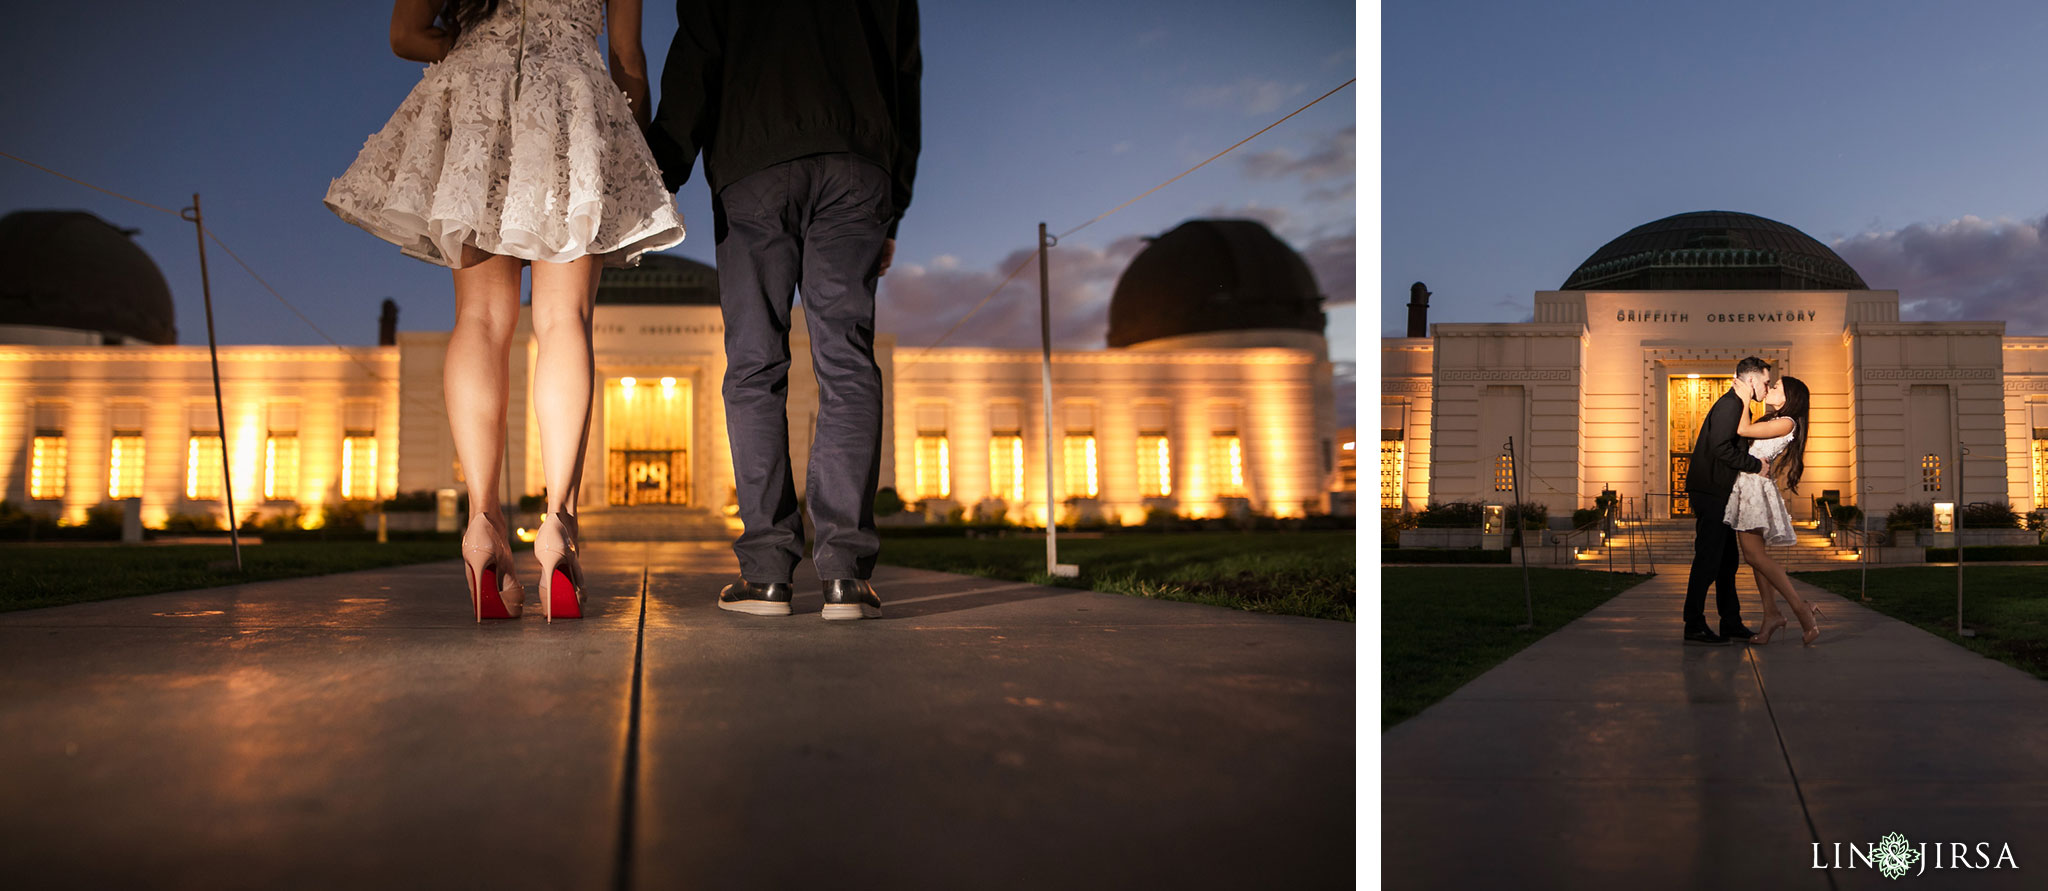 13 griffith observatory los angeles engagement photography